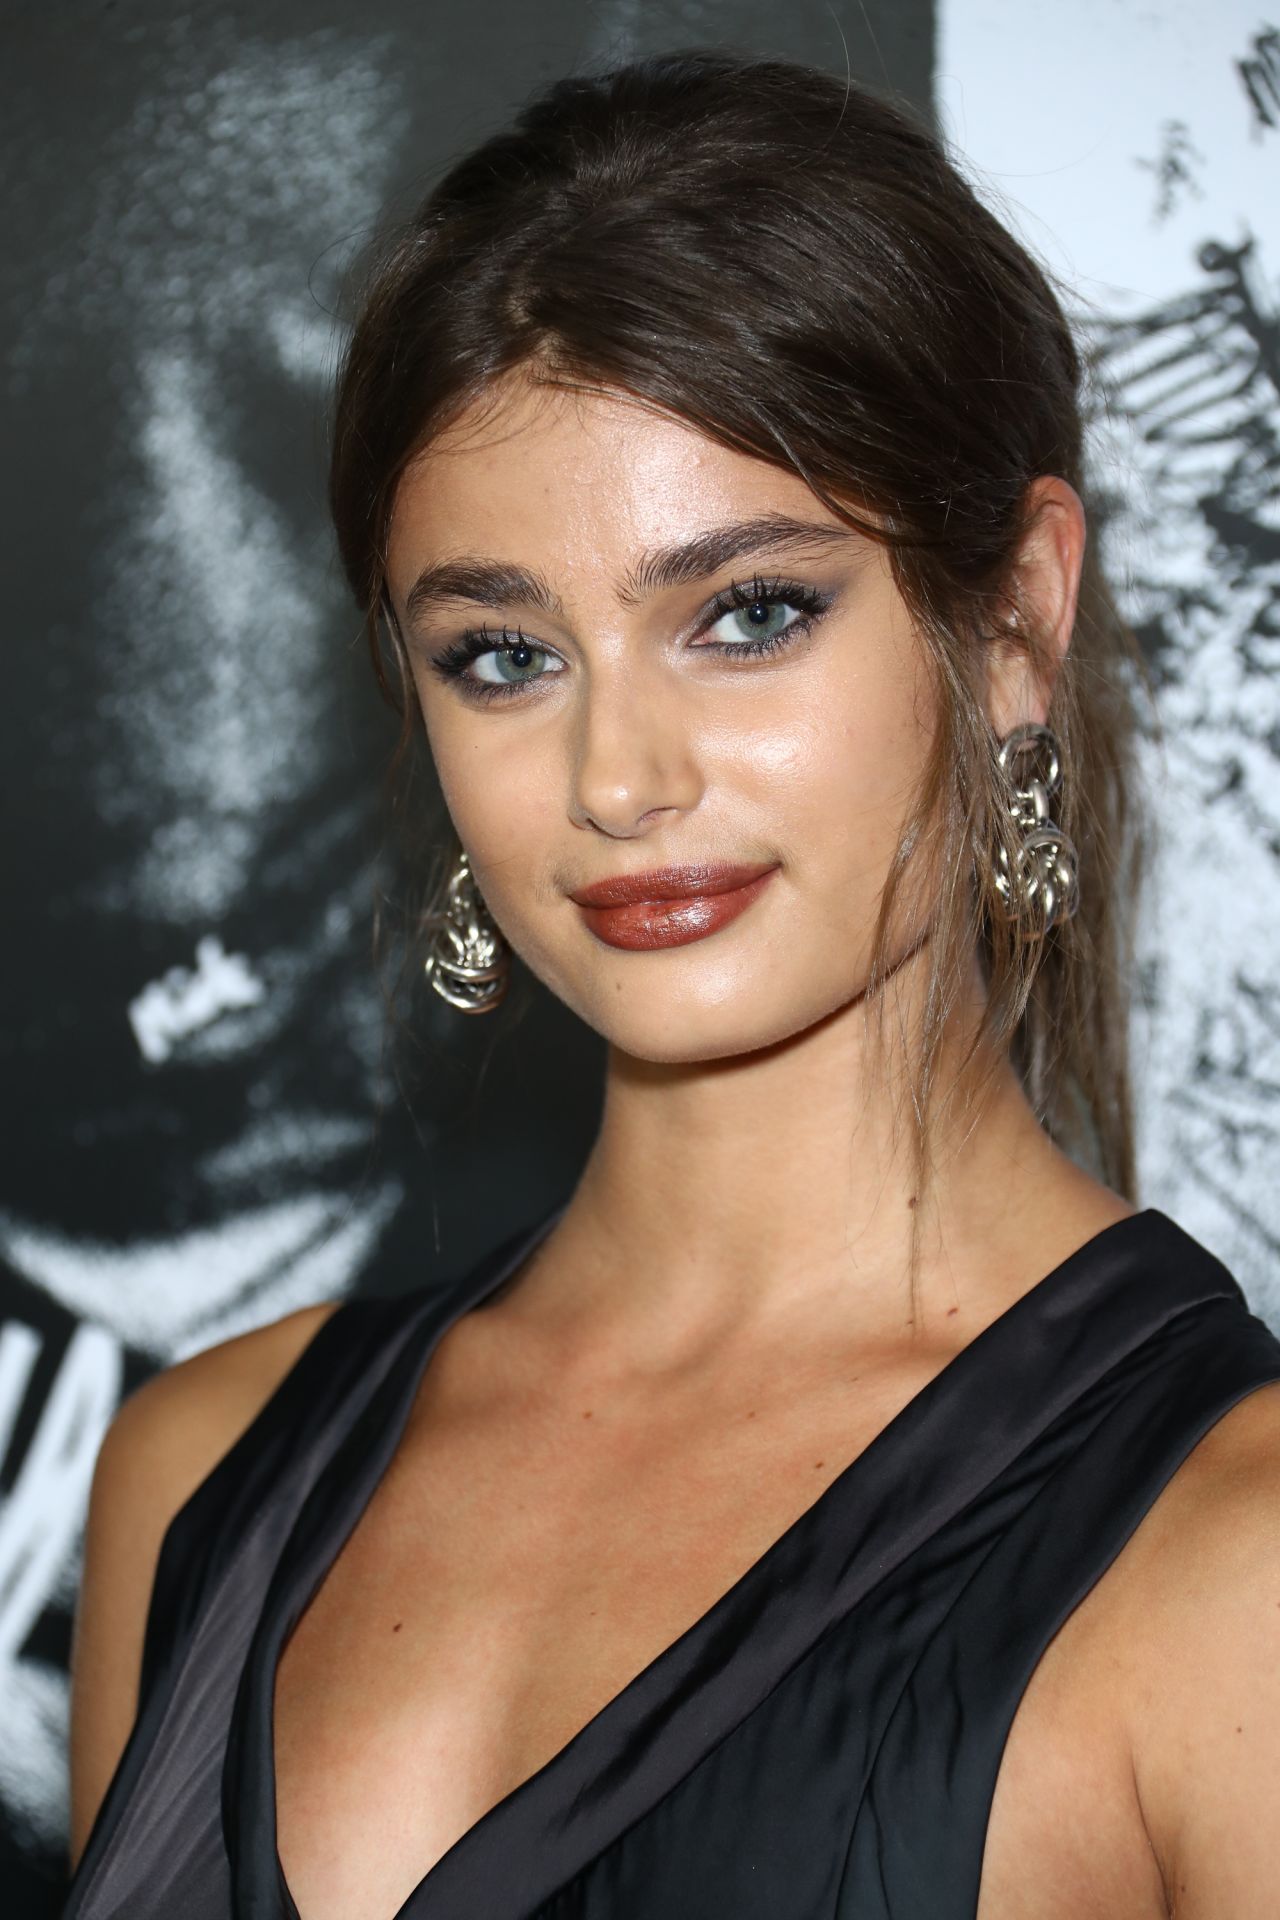 Download Free Exclusive Taylor Hill Hd Images